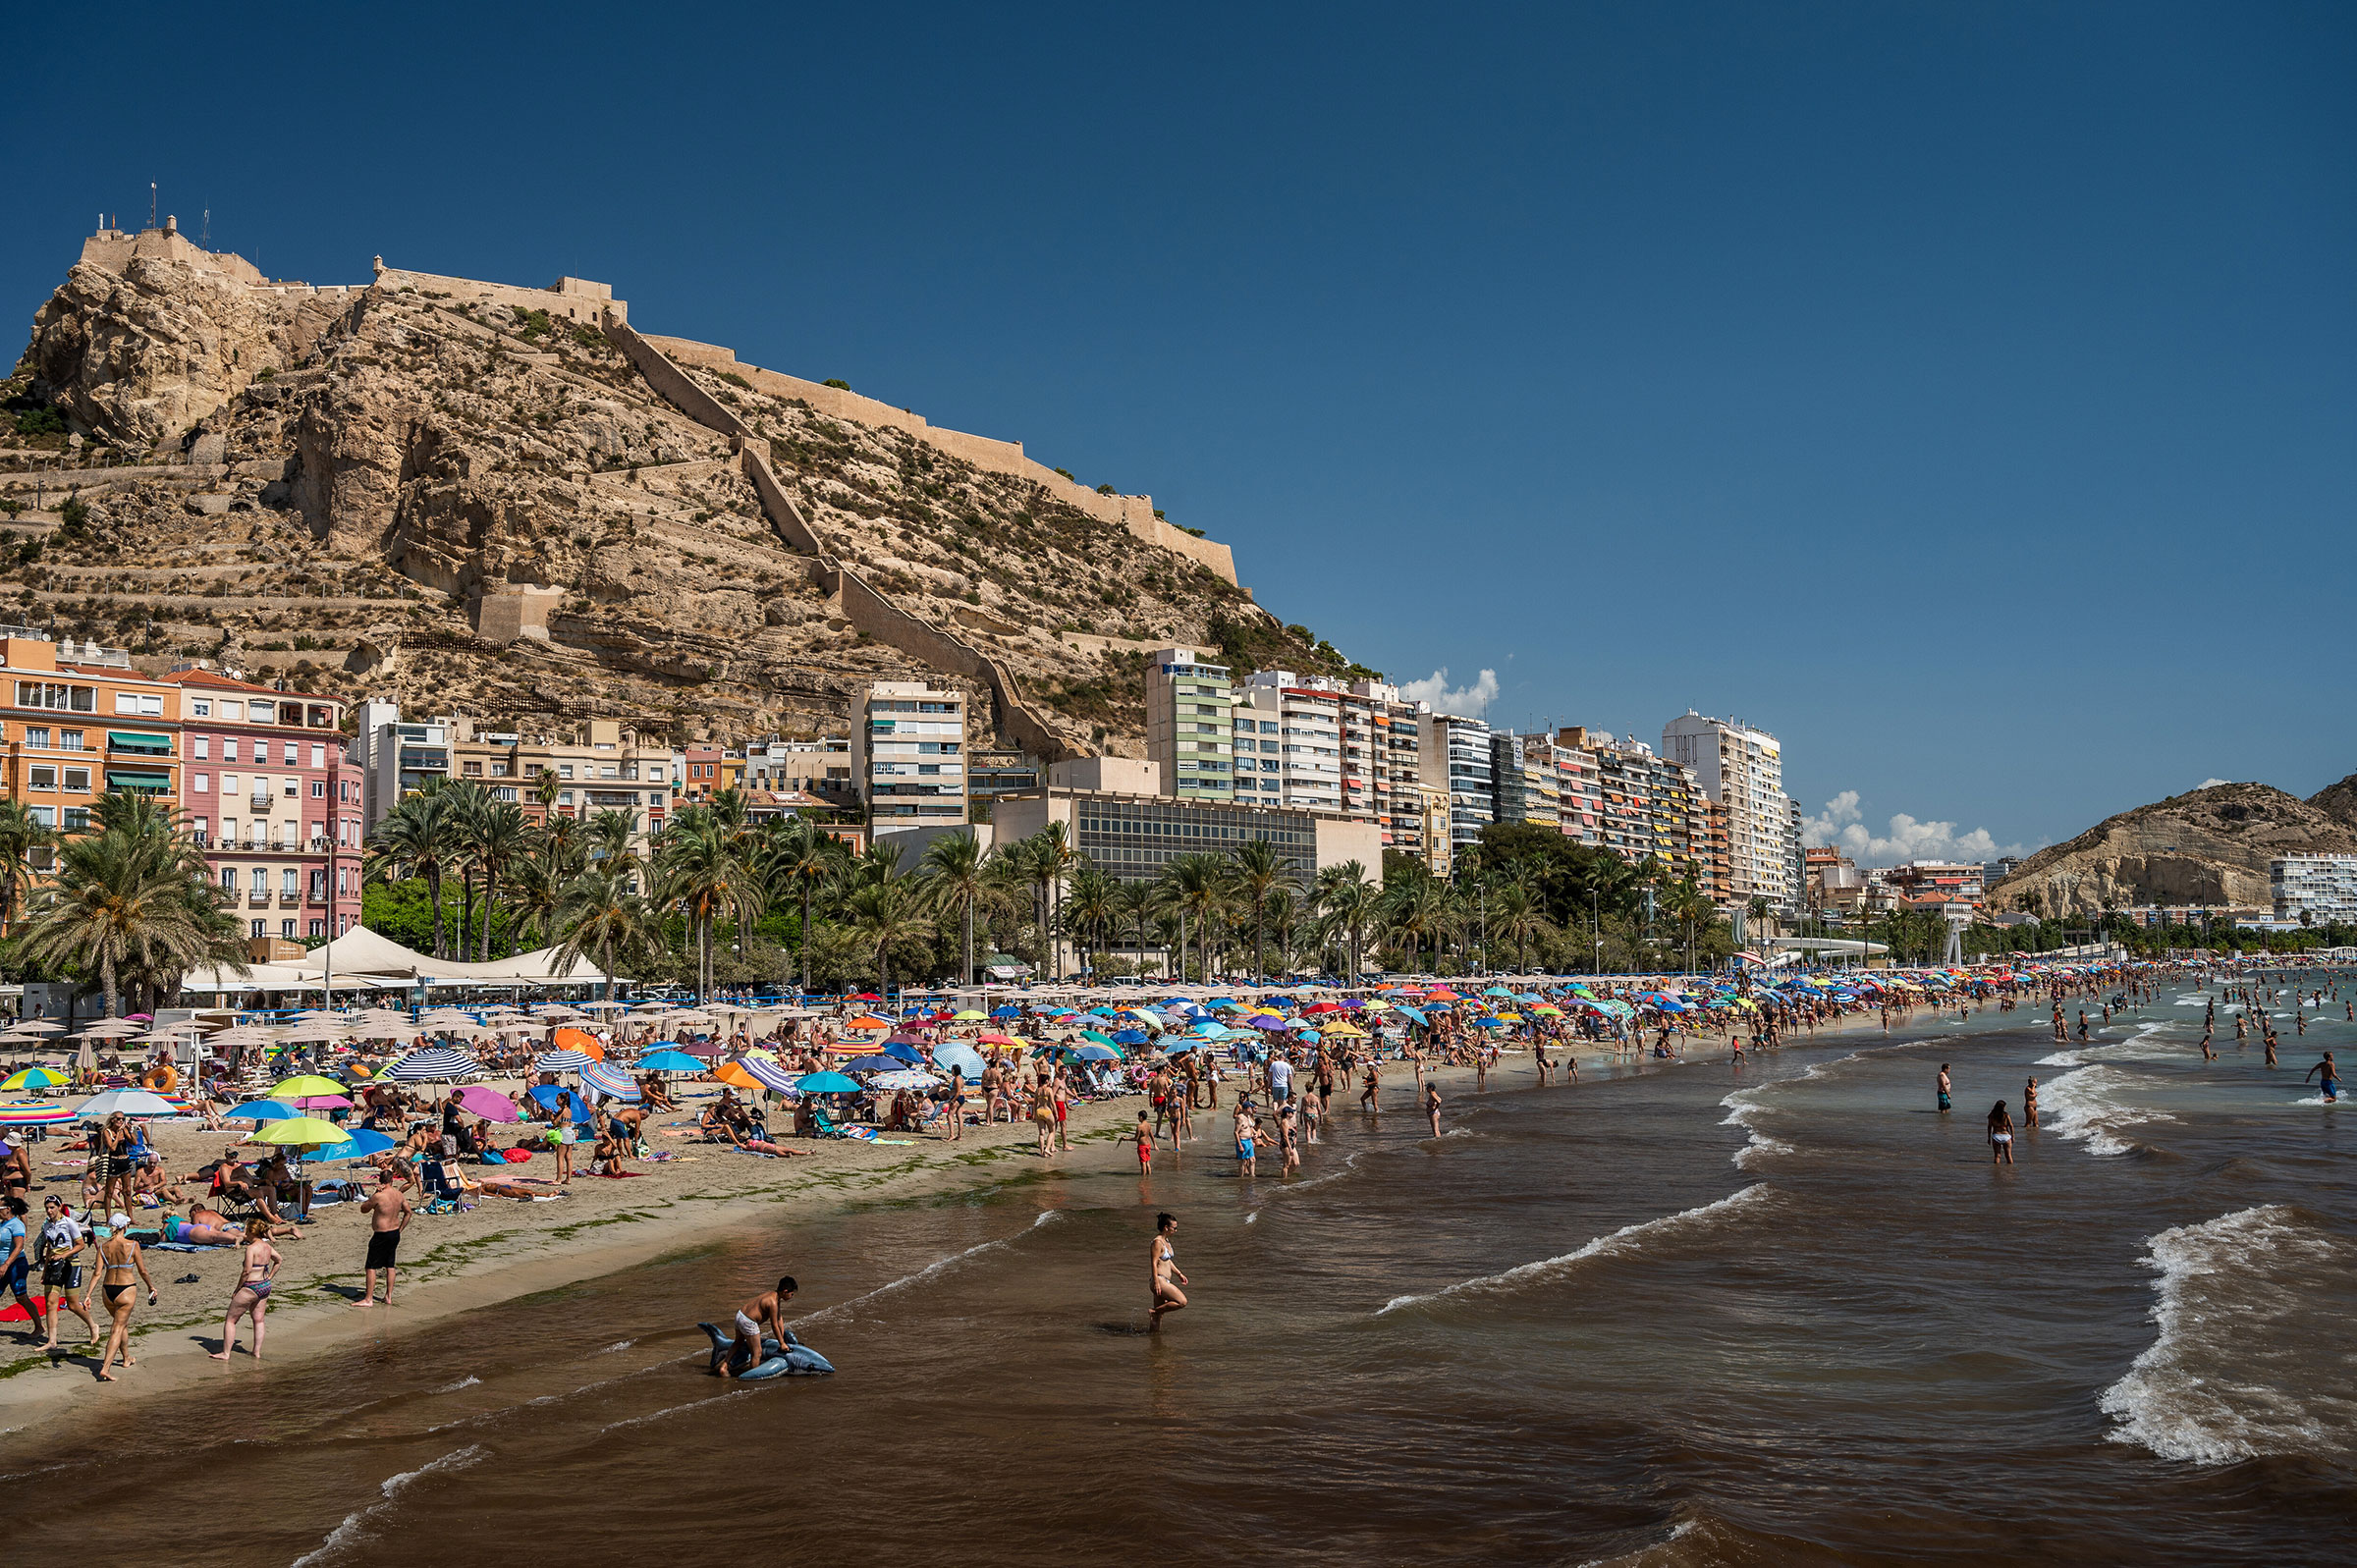 Tourists and locals crowd El Postiguet Beach on a hot August day in Alicante, Spain. (Marcos del Mazo—Lightrocket/Getty Images)